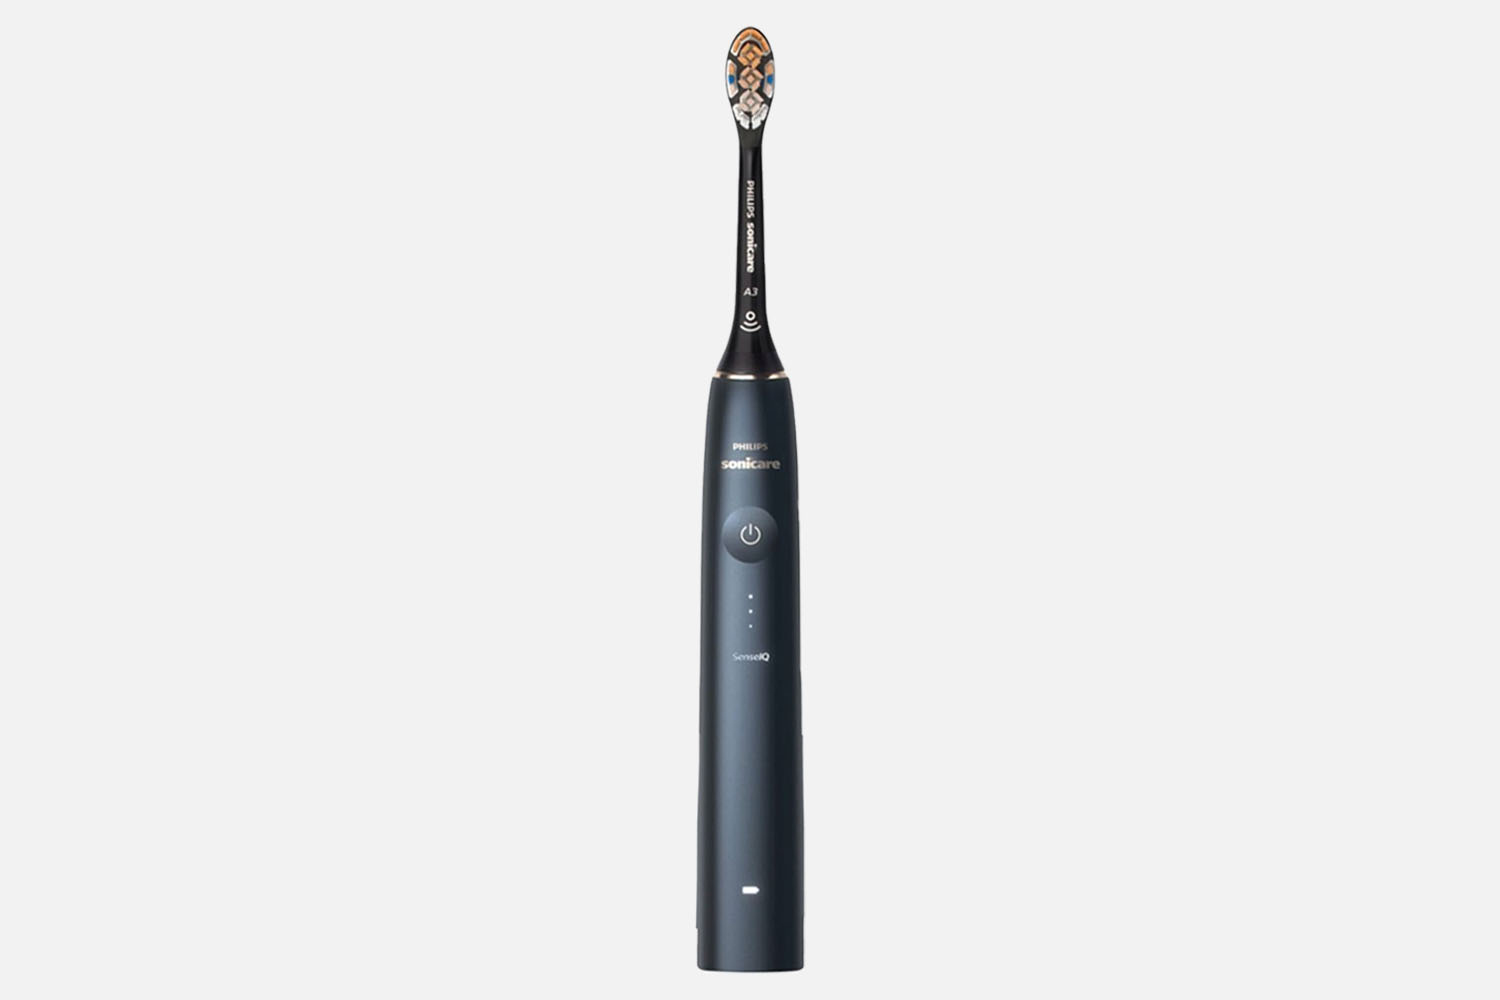 The Toothbrush - Philips Sonicare 9900 Prestige